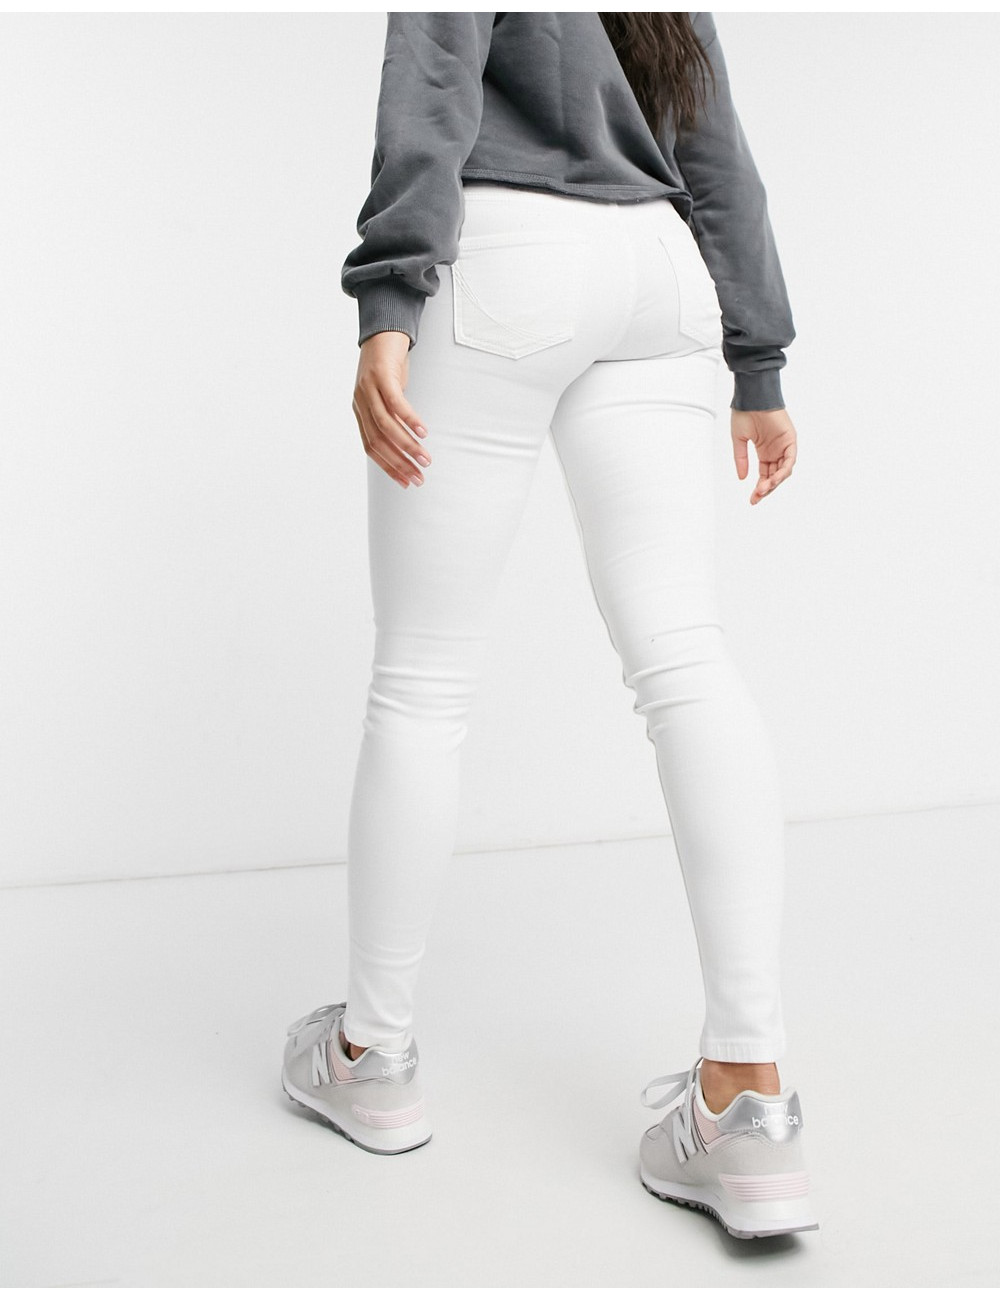 Oasis jeans in white